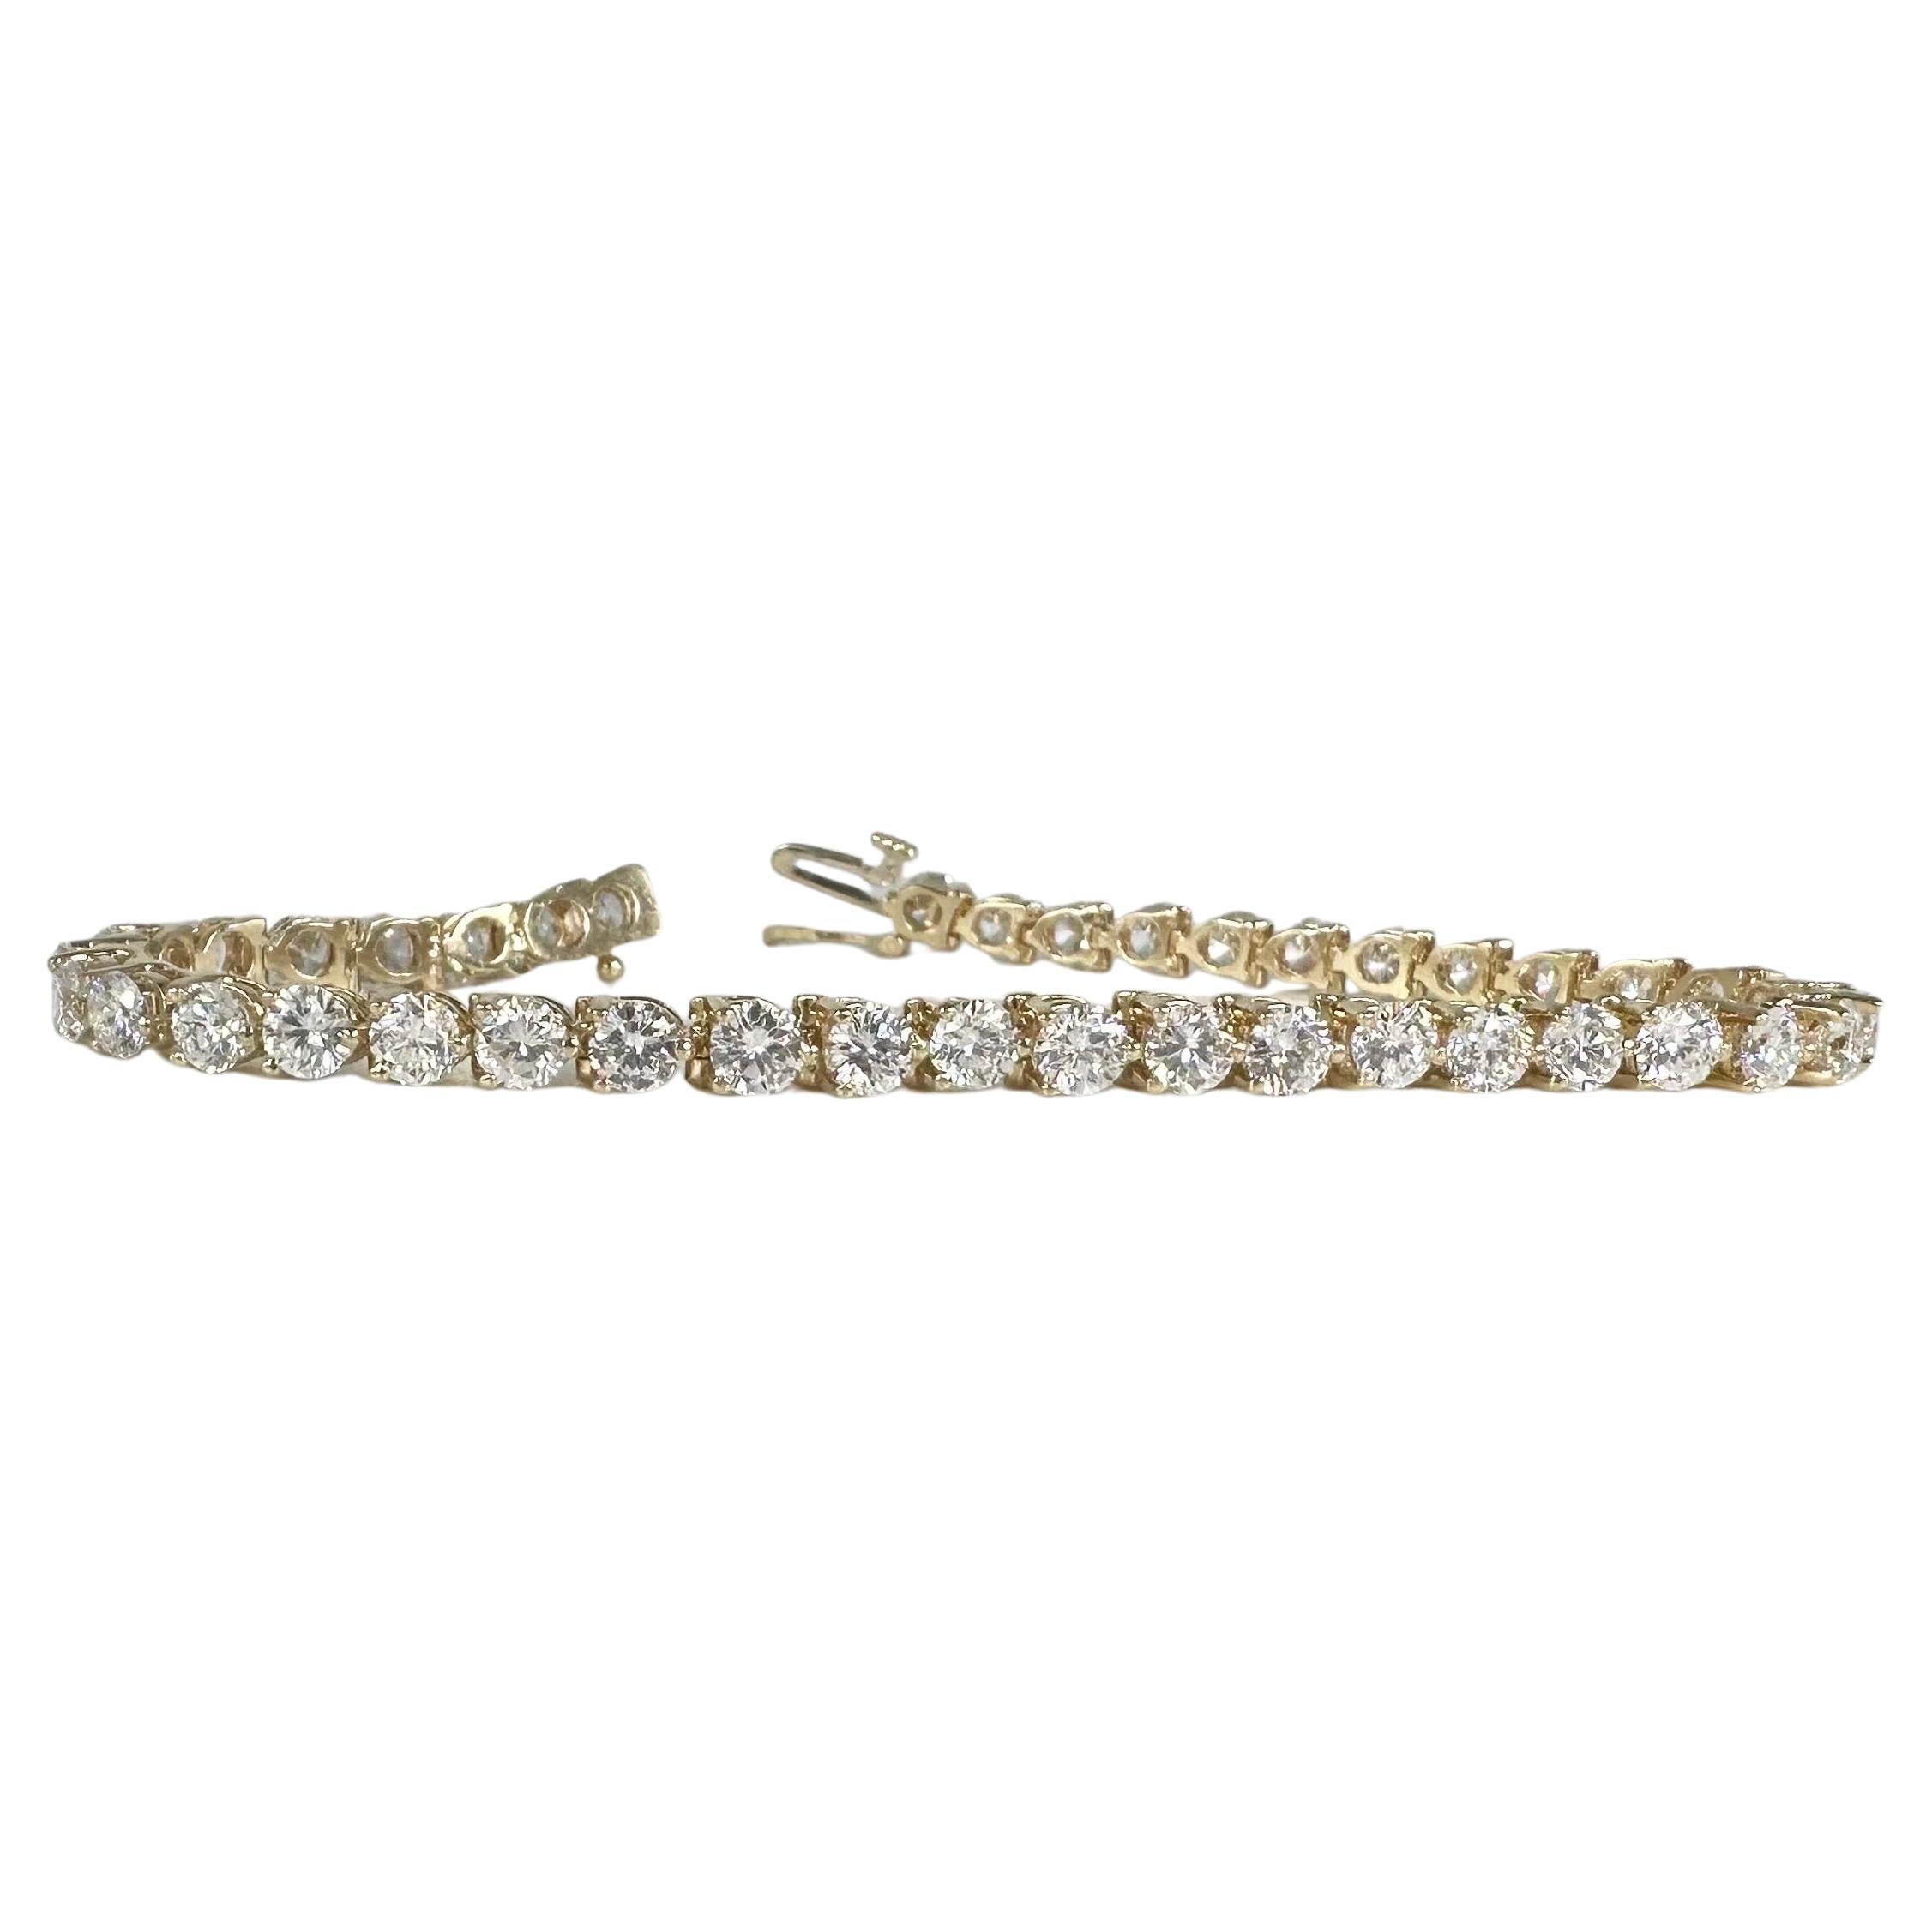 9.63ct Important Tennis Bracelet custom finished in yellow gold 14KT European 